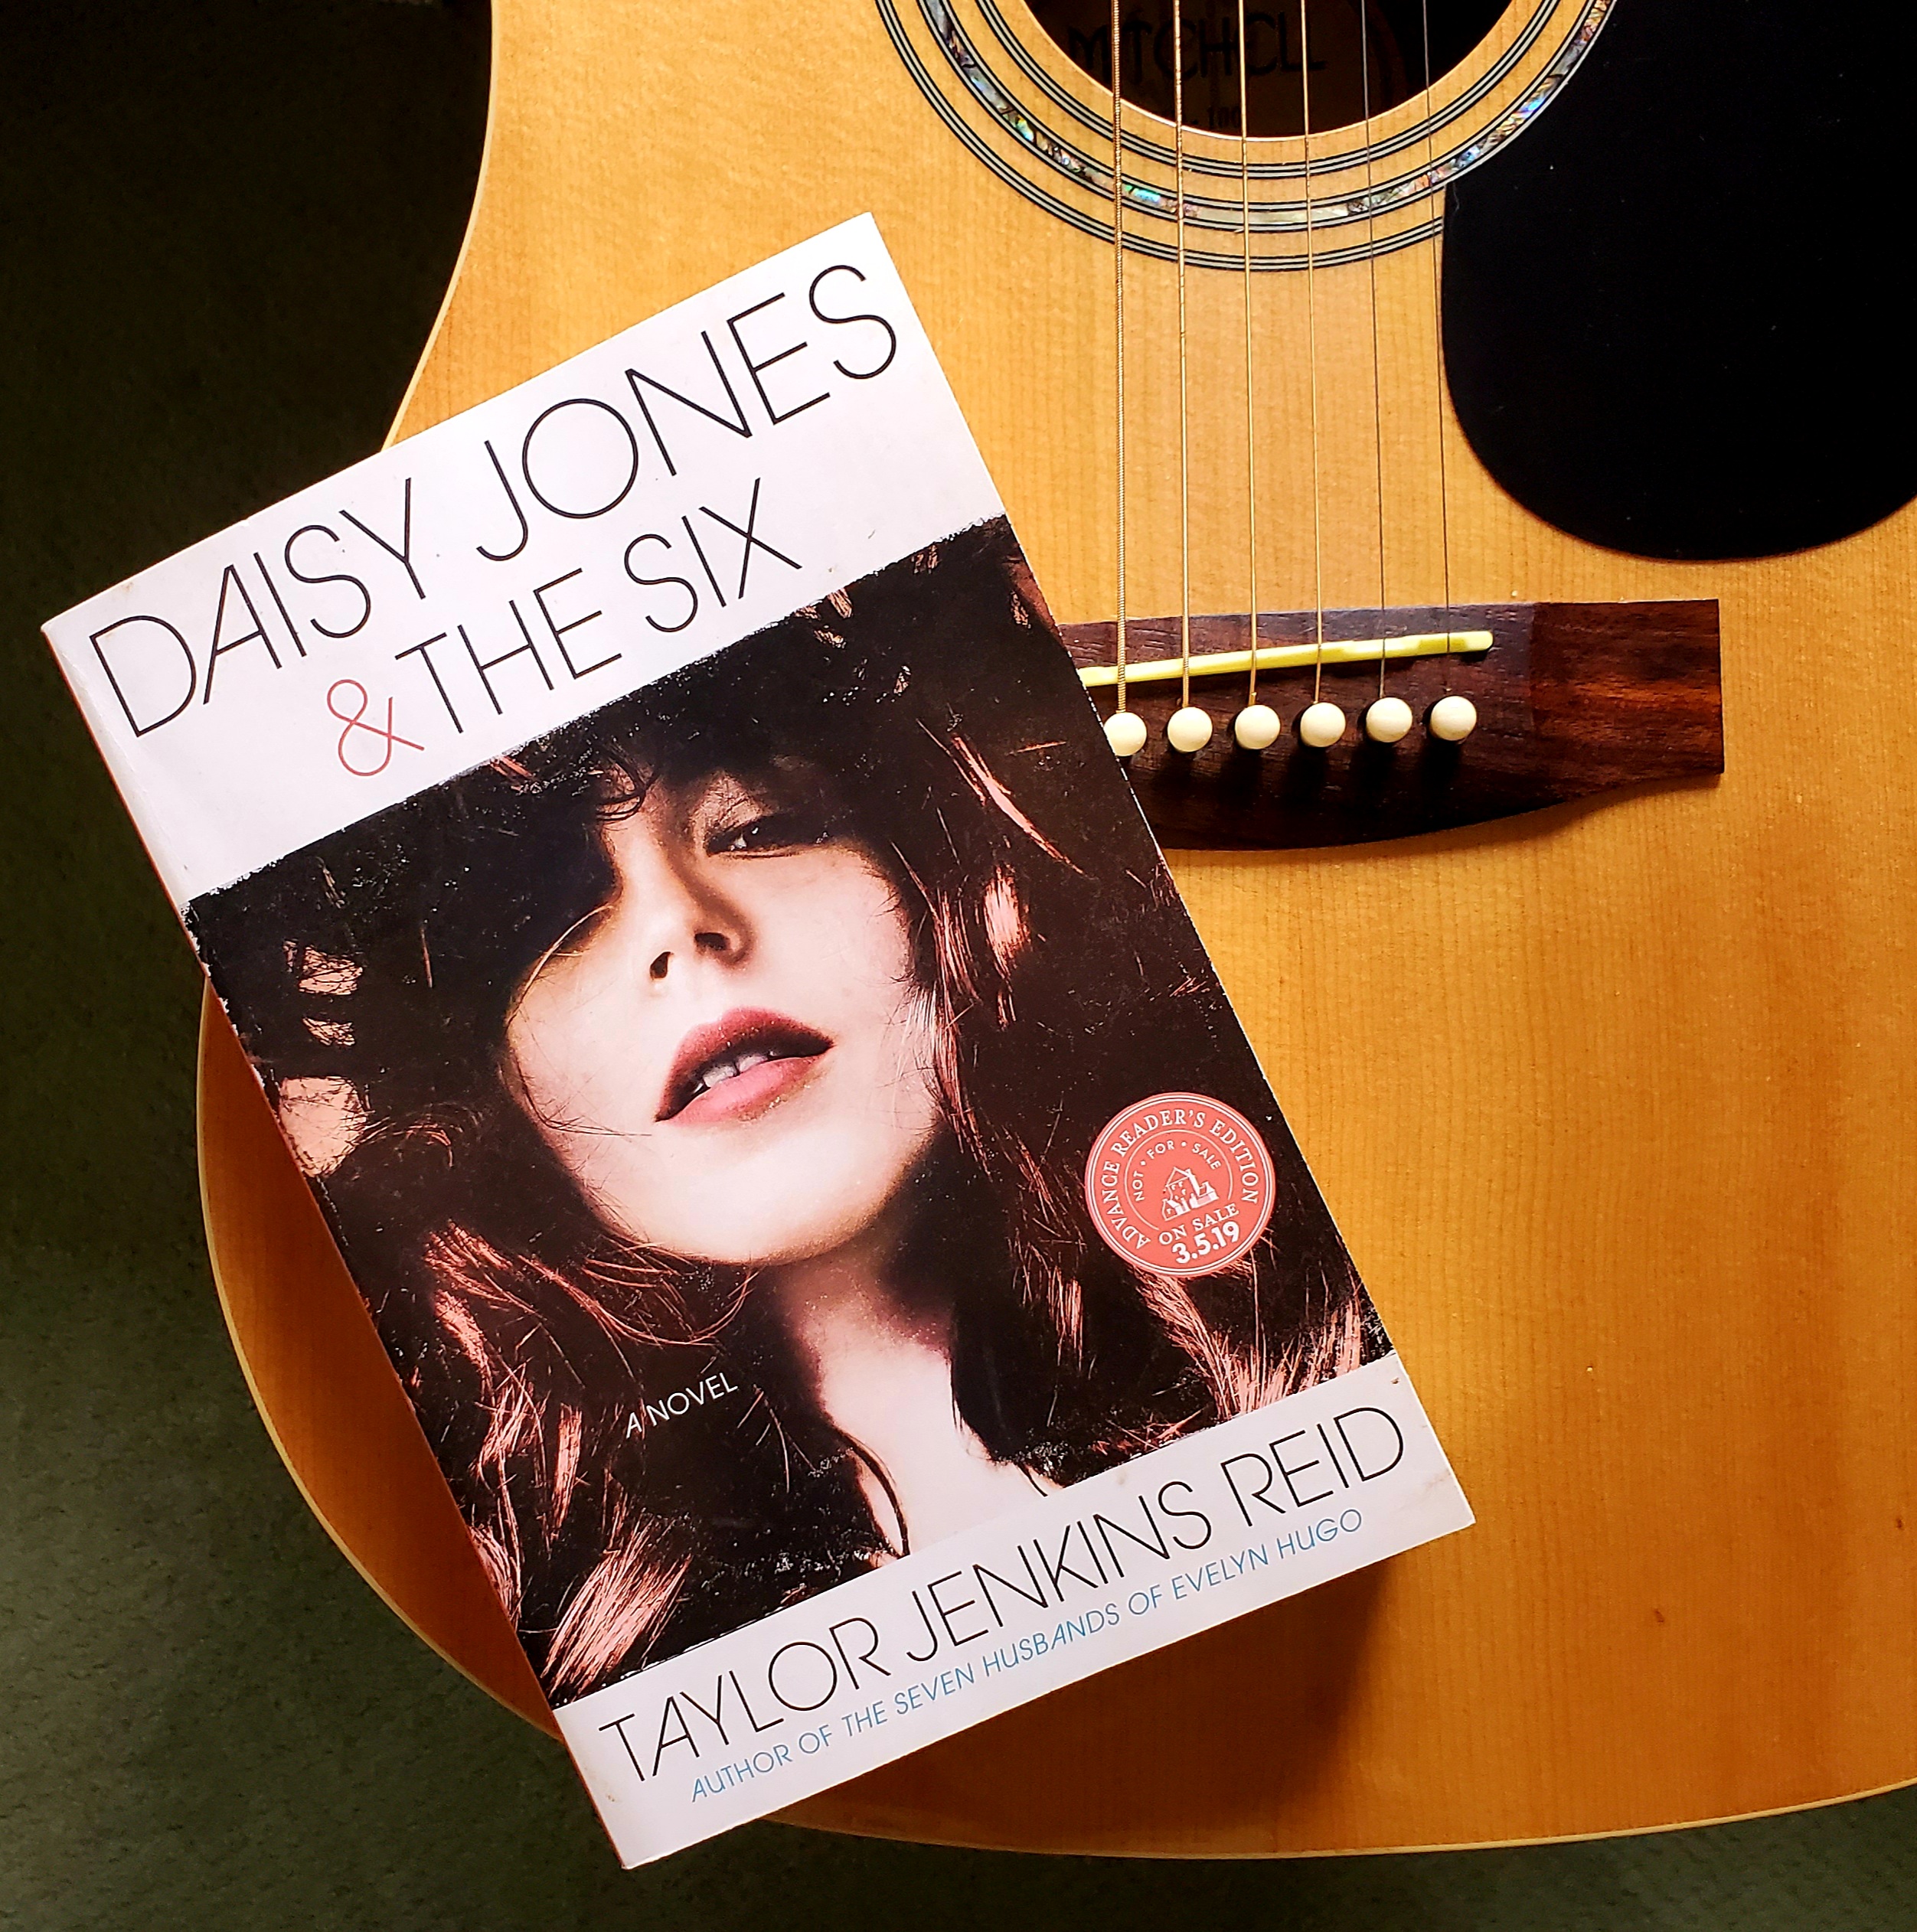 Book Review of DAISY JONES & THE SIX